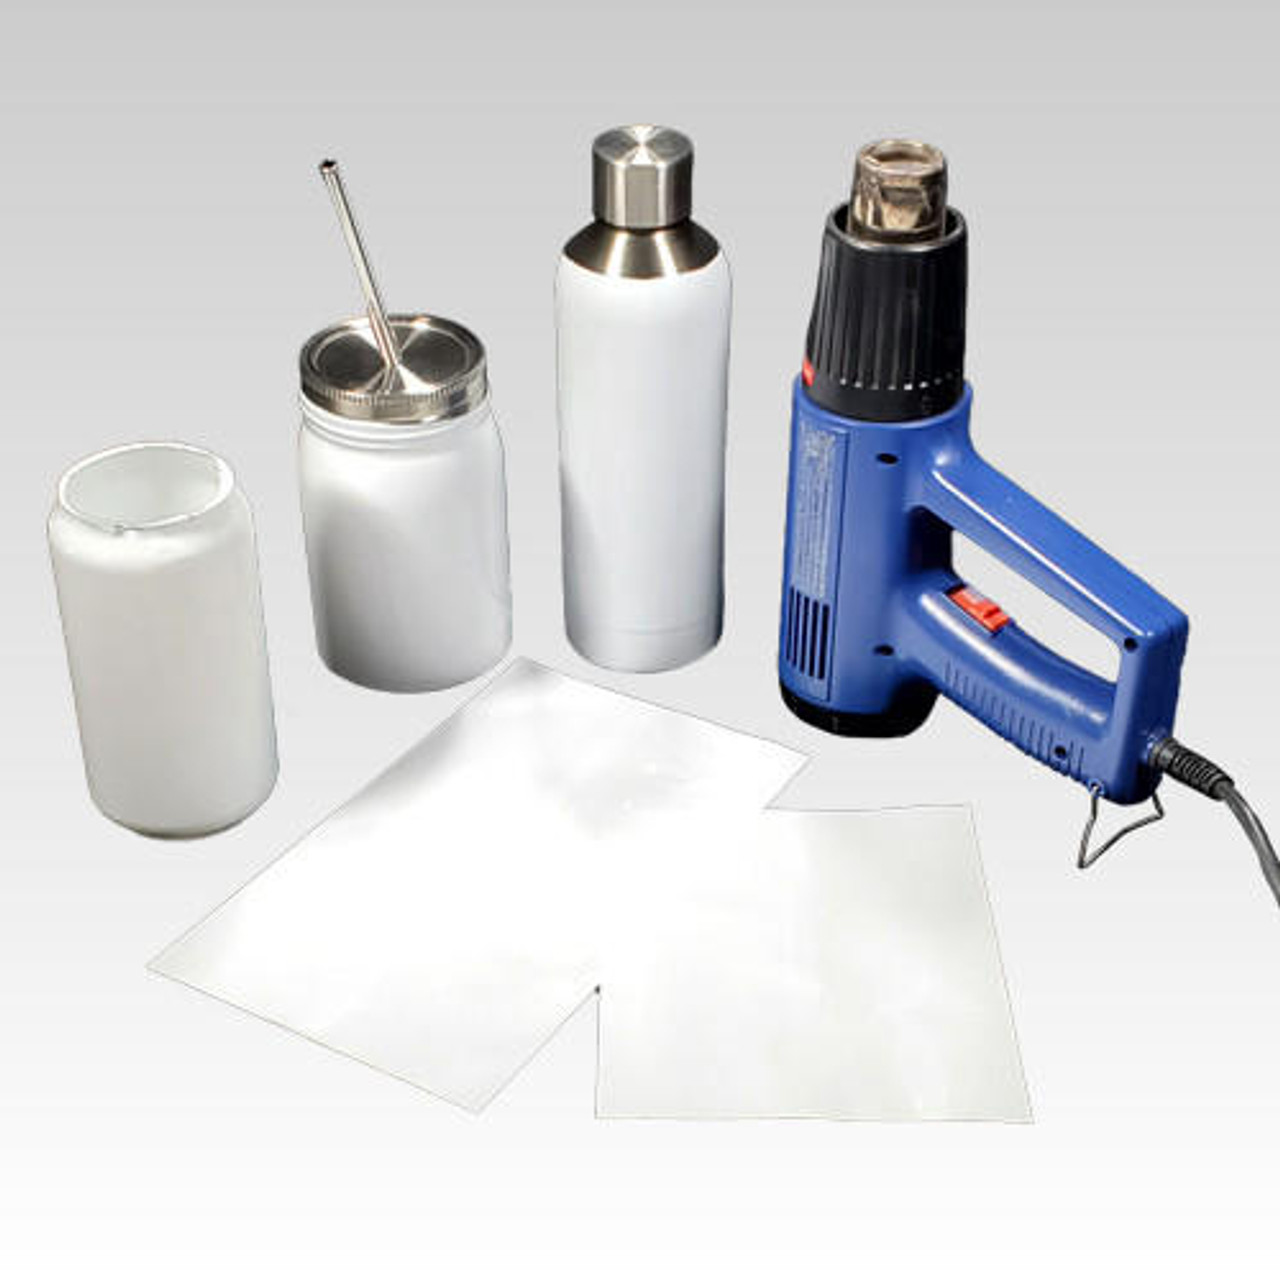 Sublimation Shrink Wrap Sleeves - Sublimation Tools - Quick Blanks & More